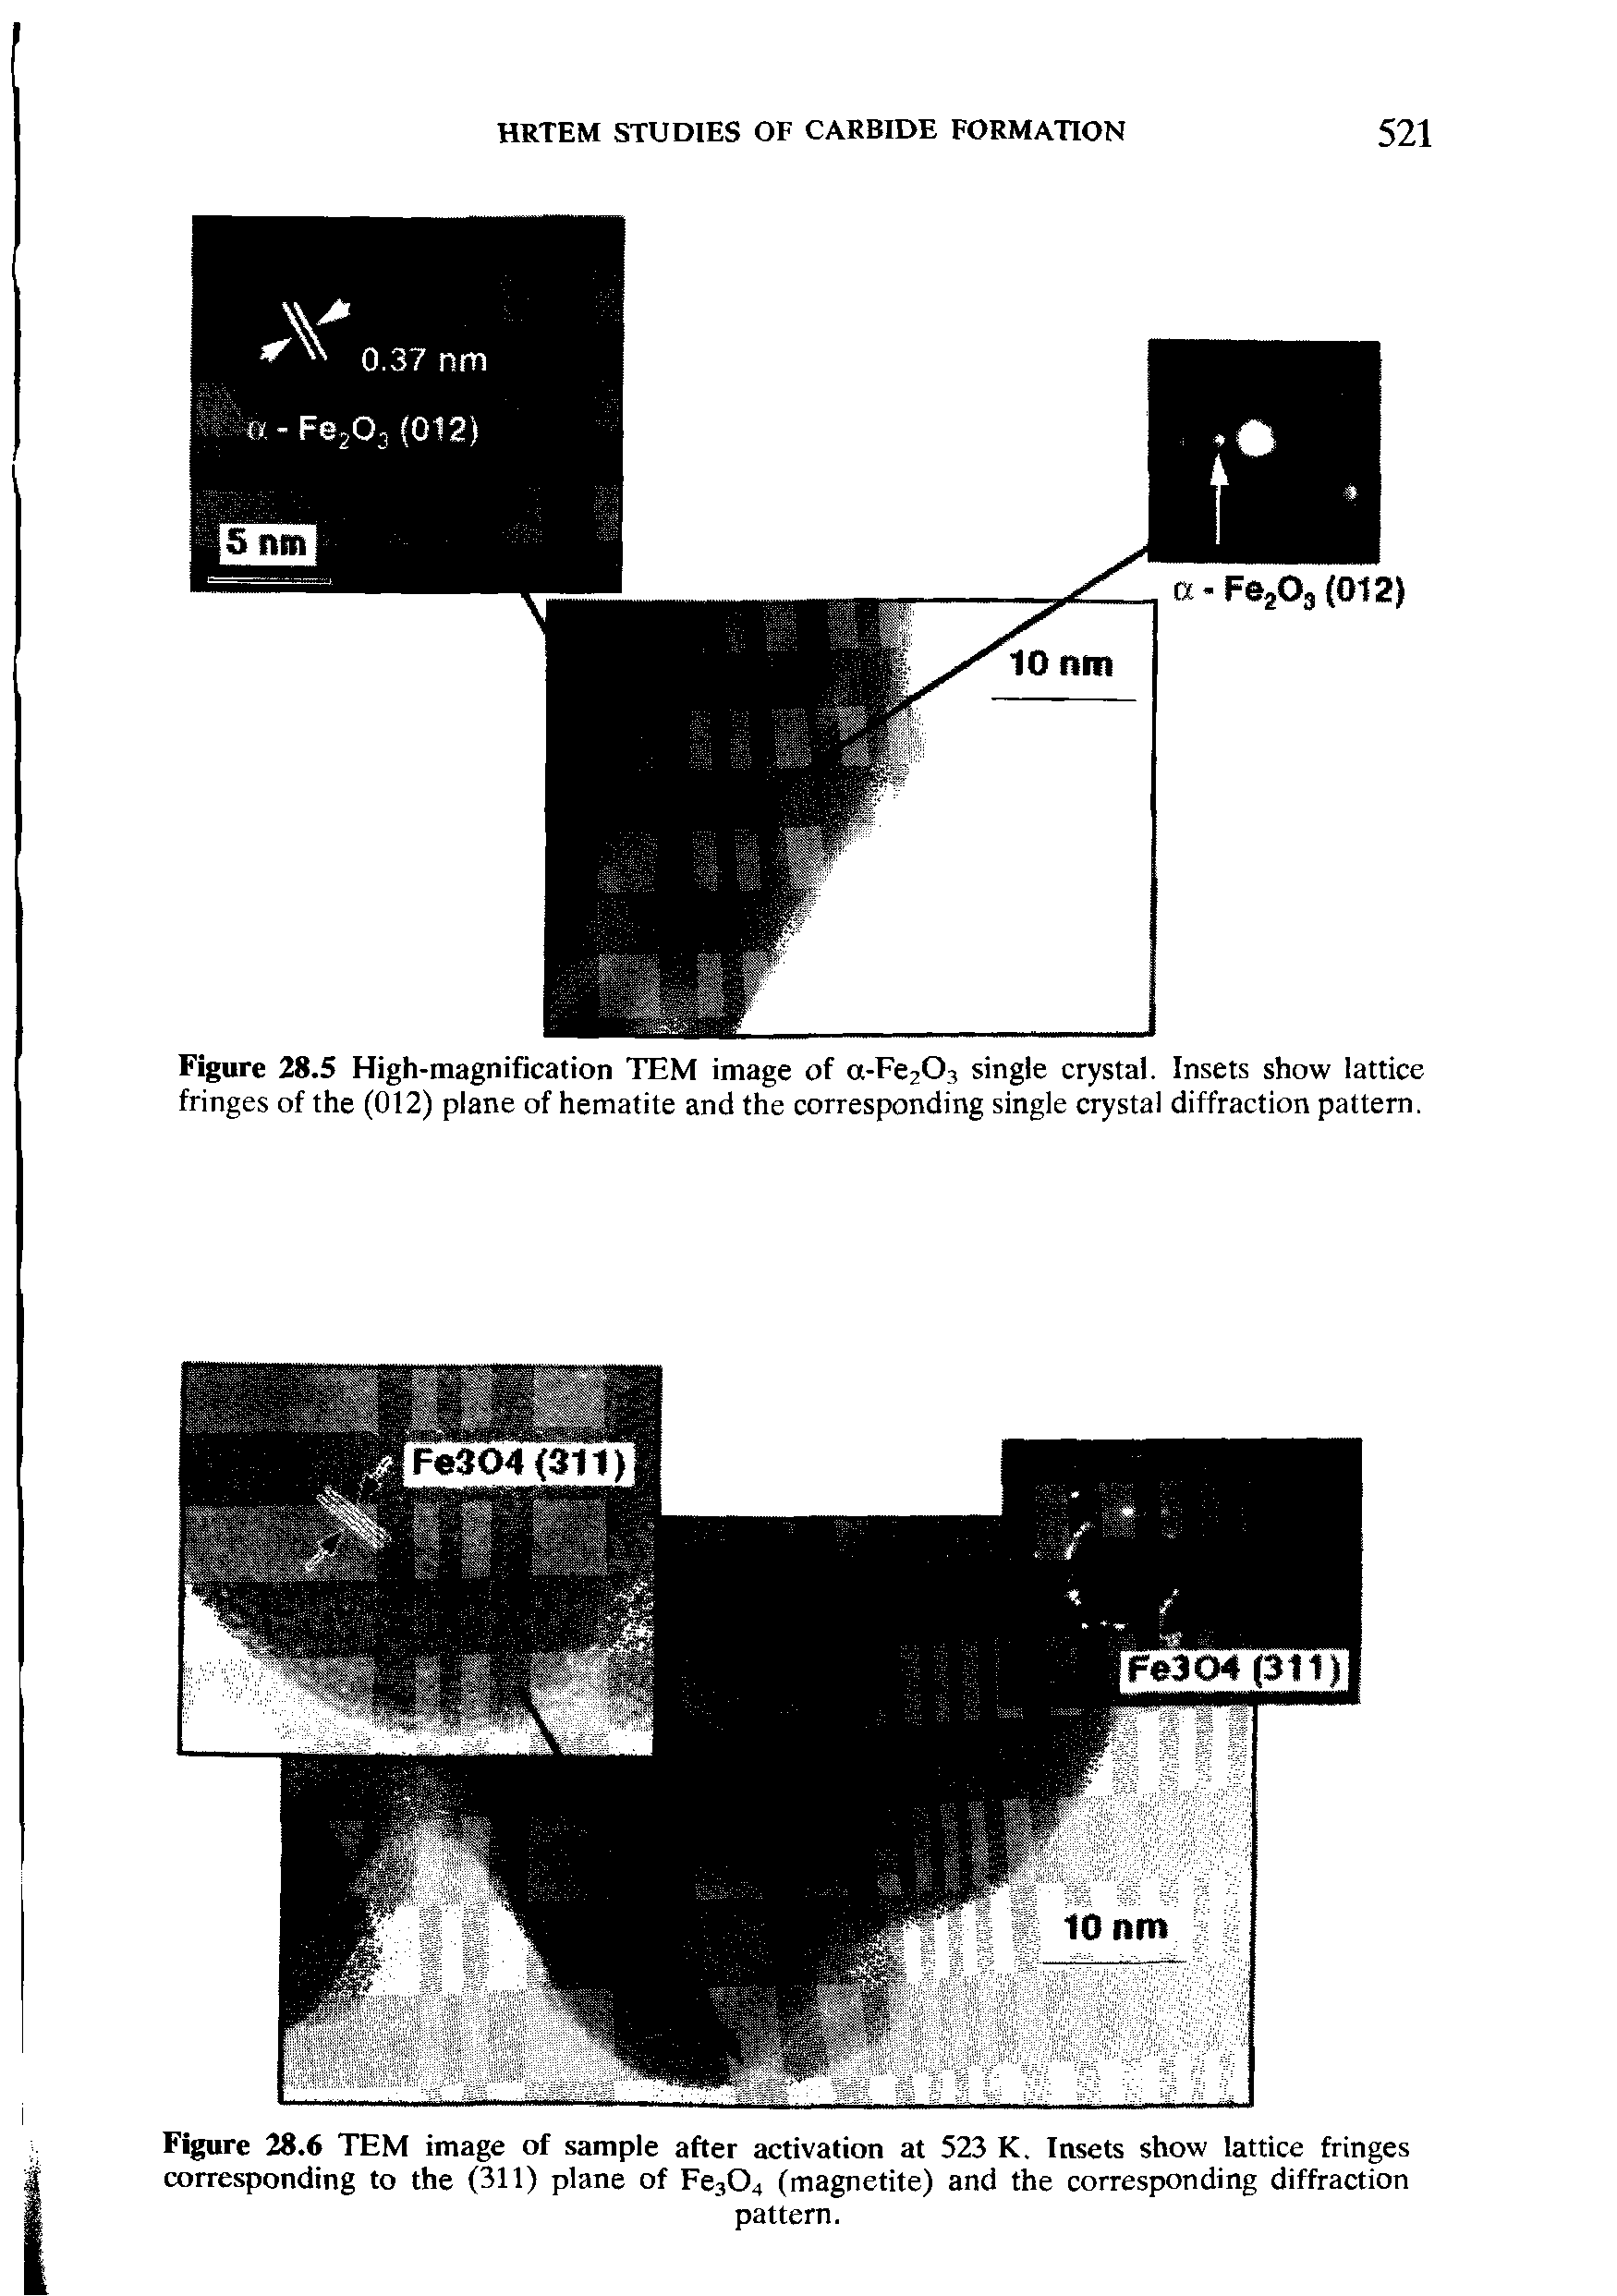 Figure 28.6 TEM image of sample after activation at 523 K. Insets show lattice fringes corresponding to the (311) plane of Fe304 (magnetite) and the corresponding diffraction...